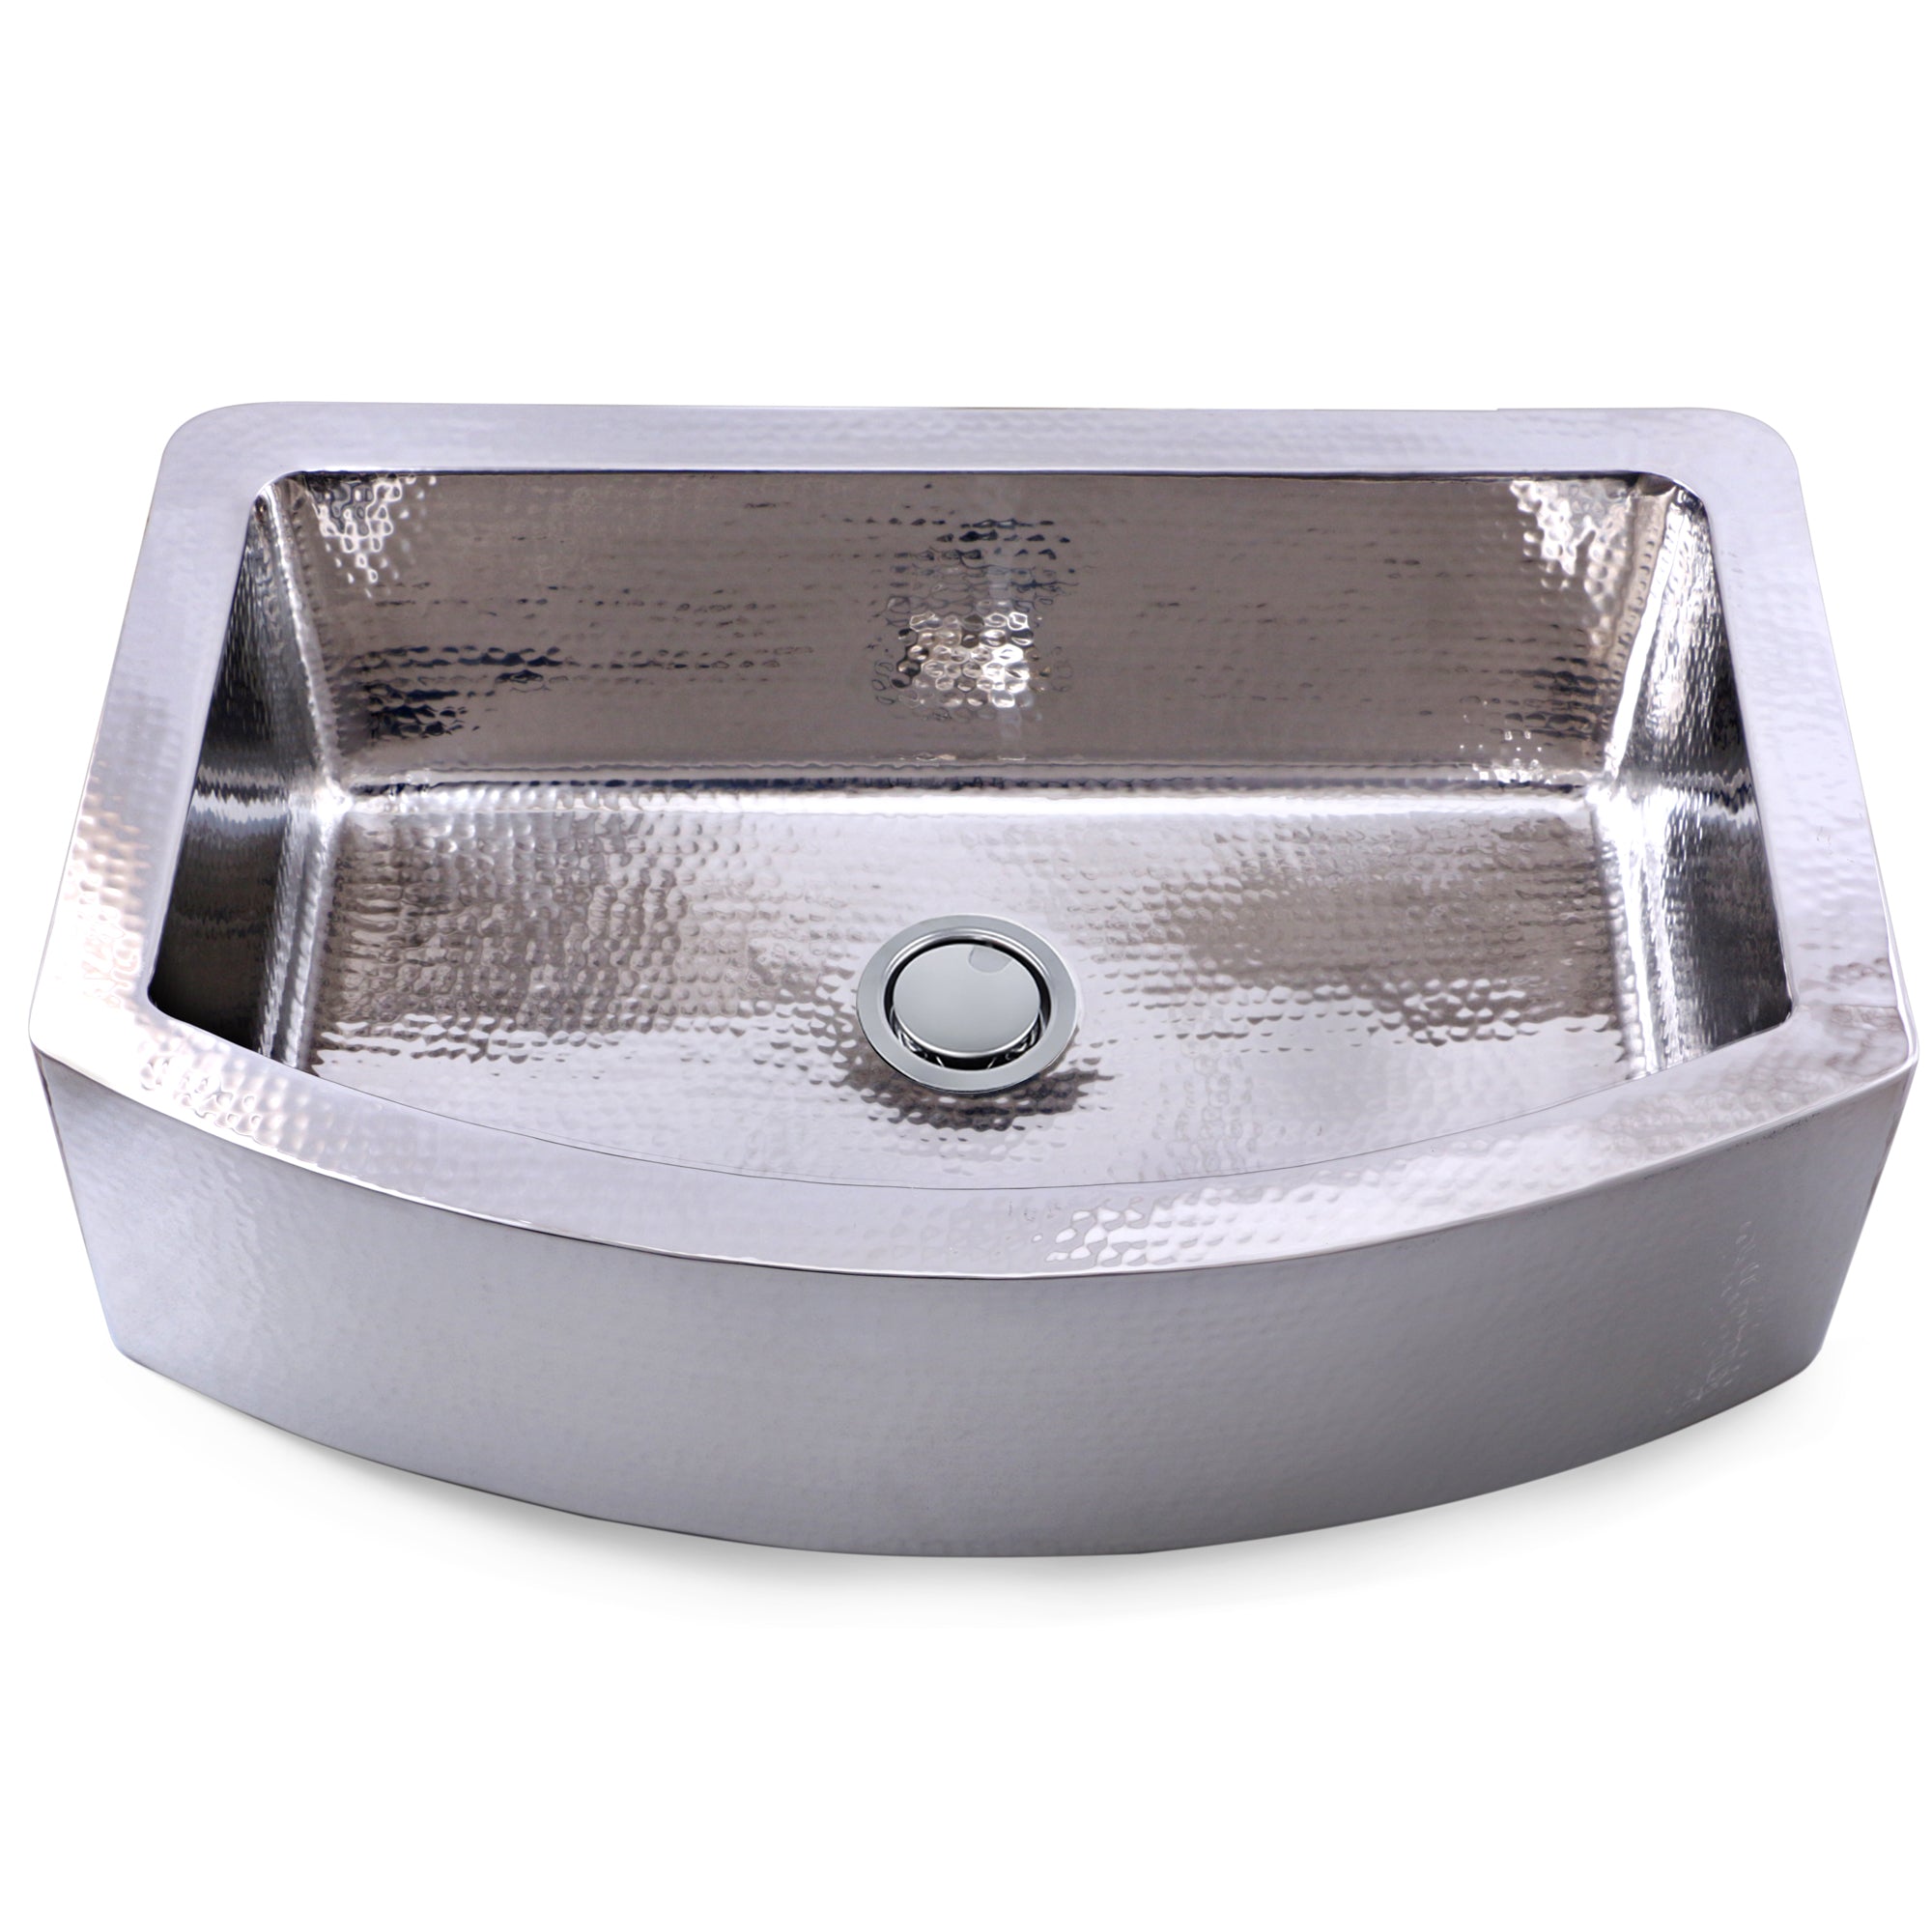 Nantucket Sinks 33 Inch Hammered Farmhouse Stainless Steel Sink